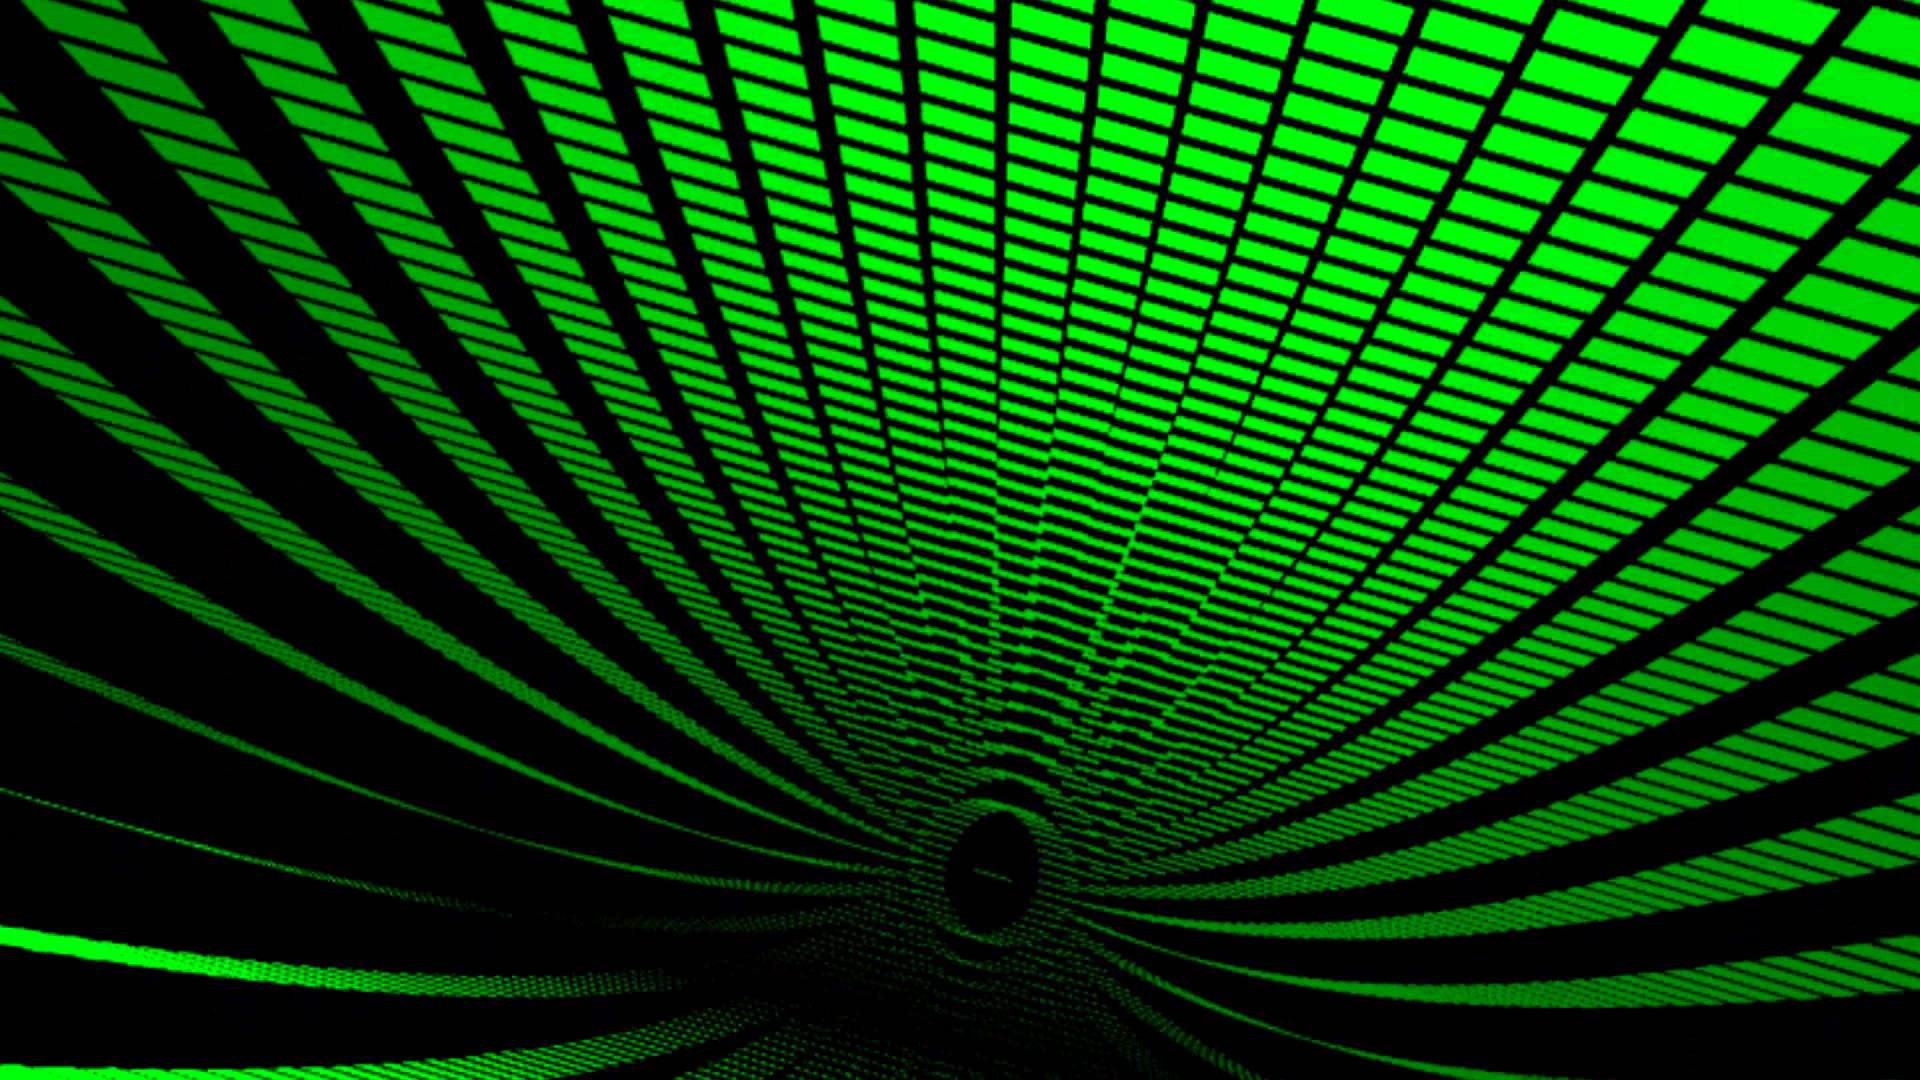 Green Square Tunnel ANIMATION FREE FOOTAGE HD Creation Black